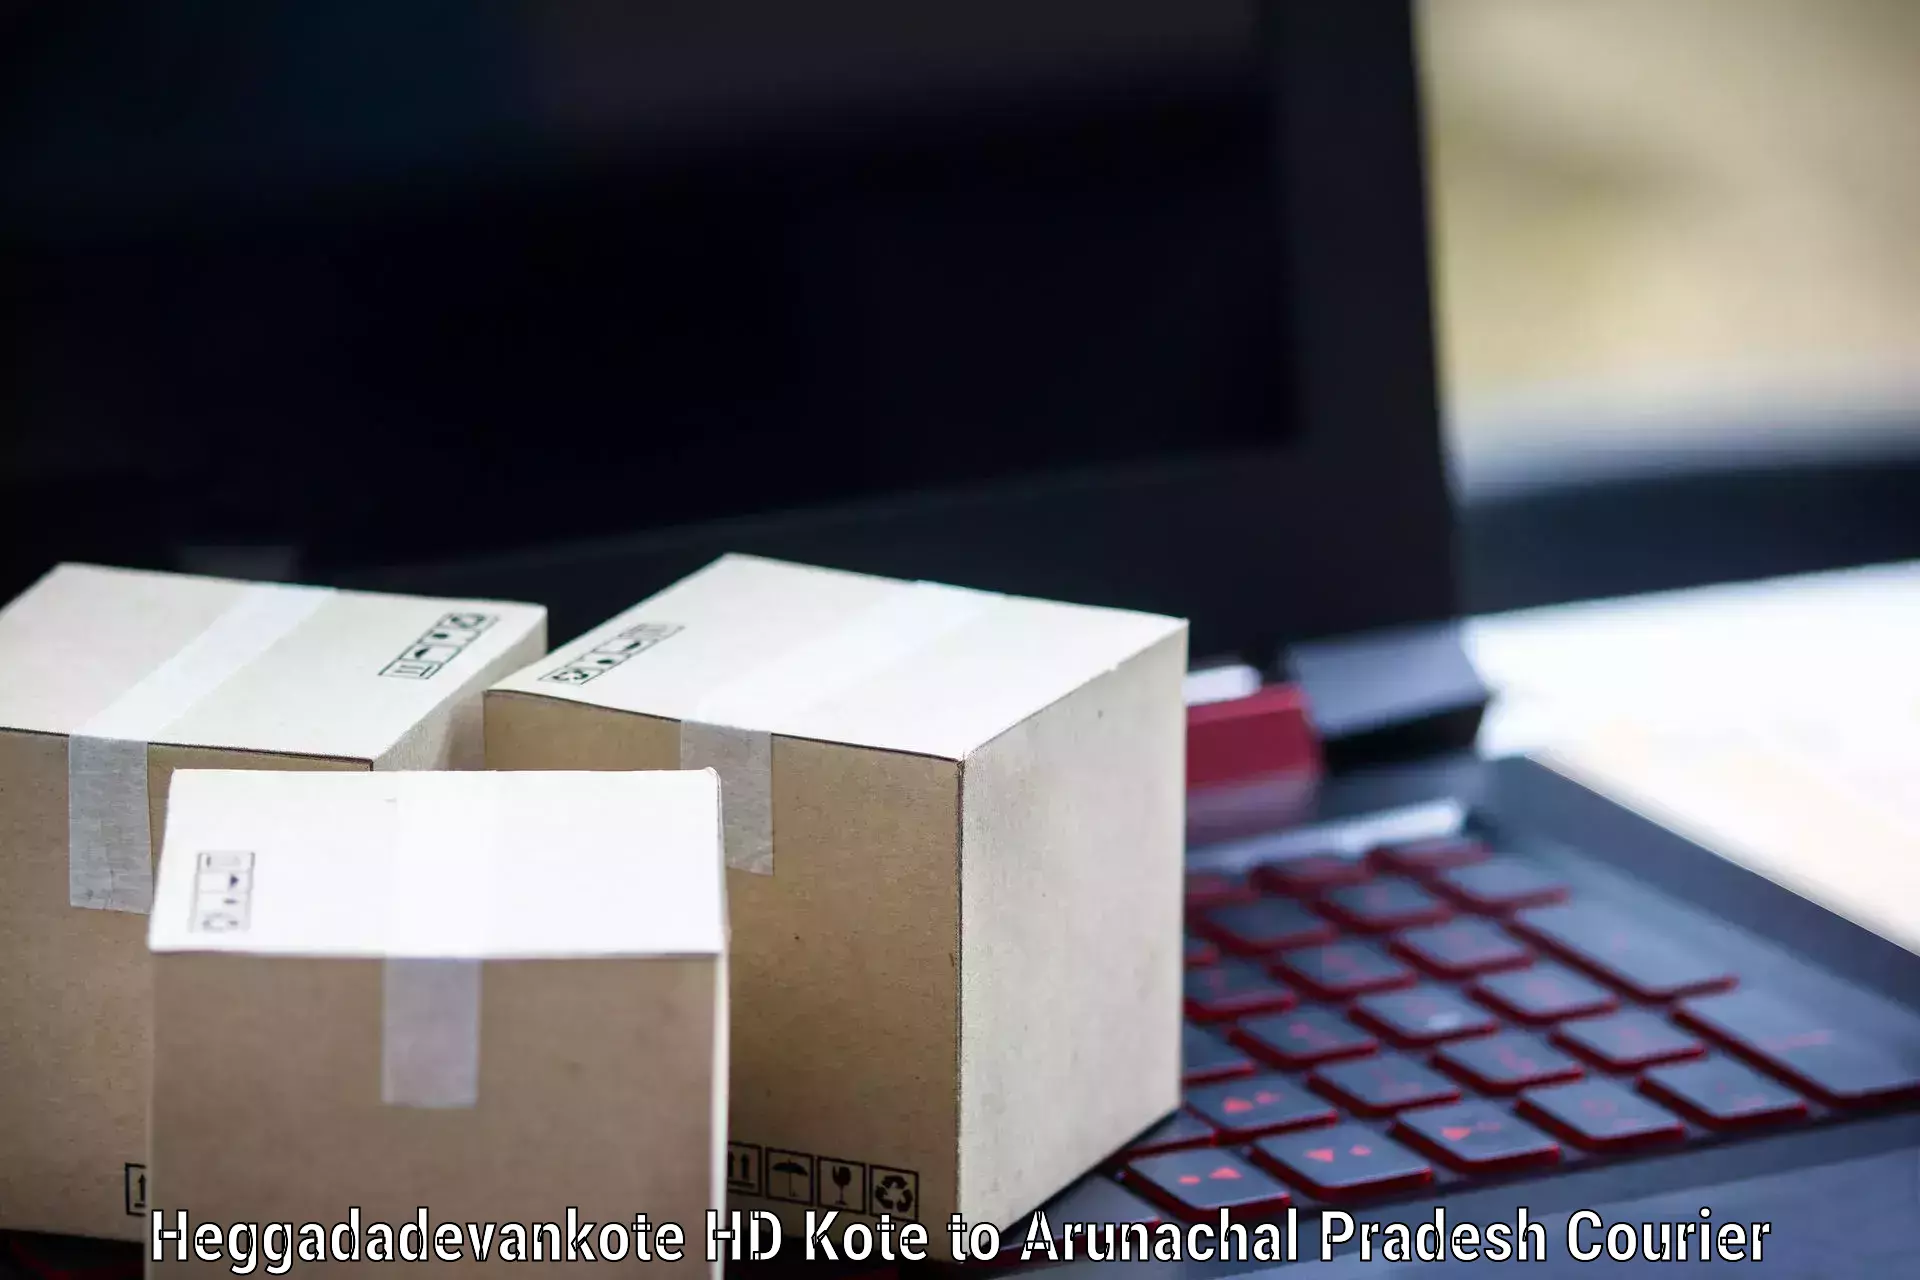 Personal parcel delivery in Heggadadevankote HD Kote to Likabali